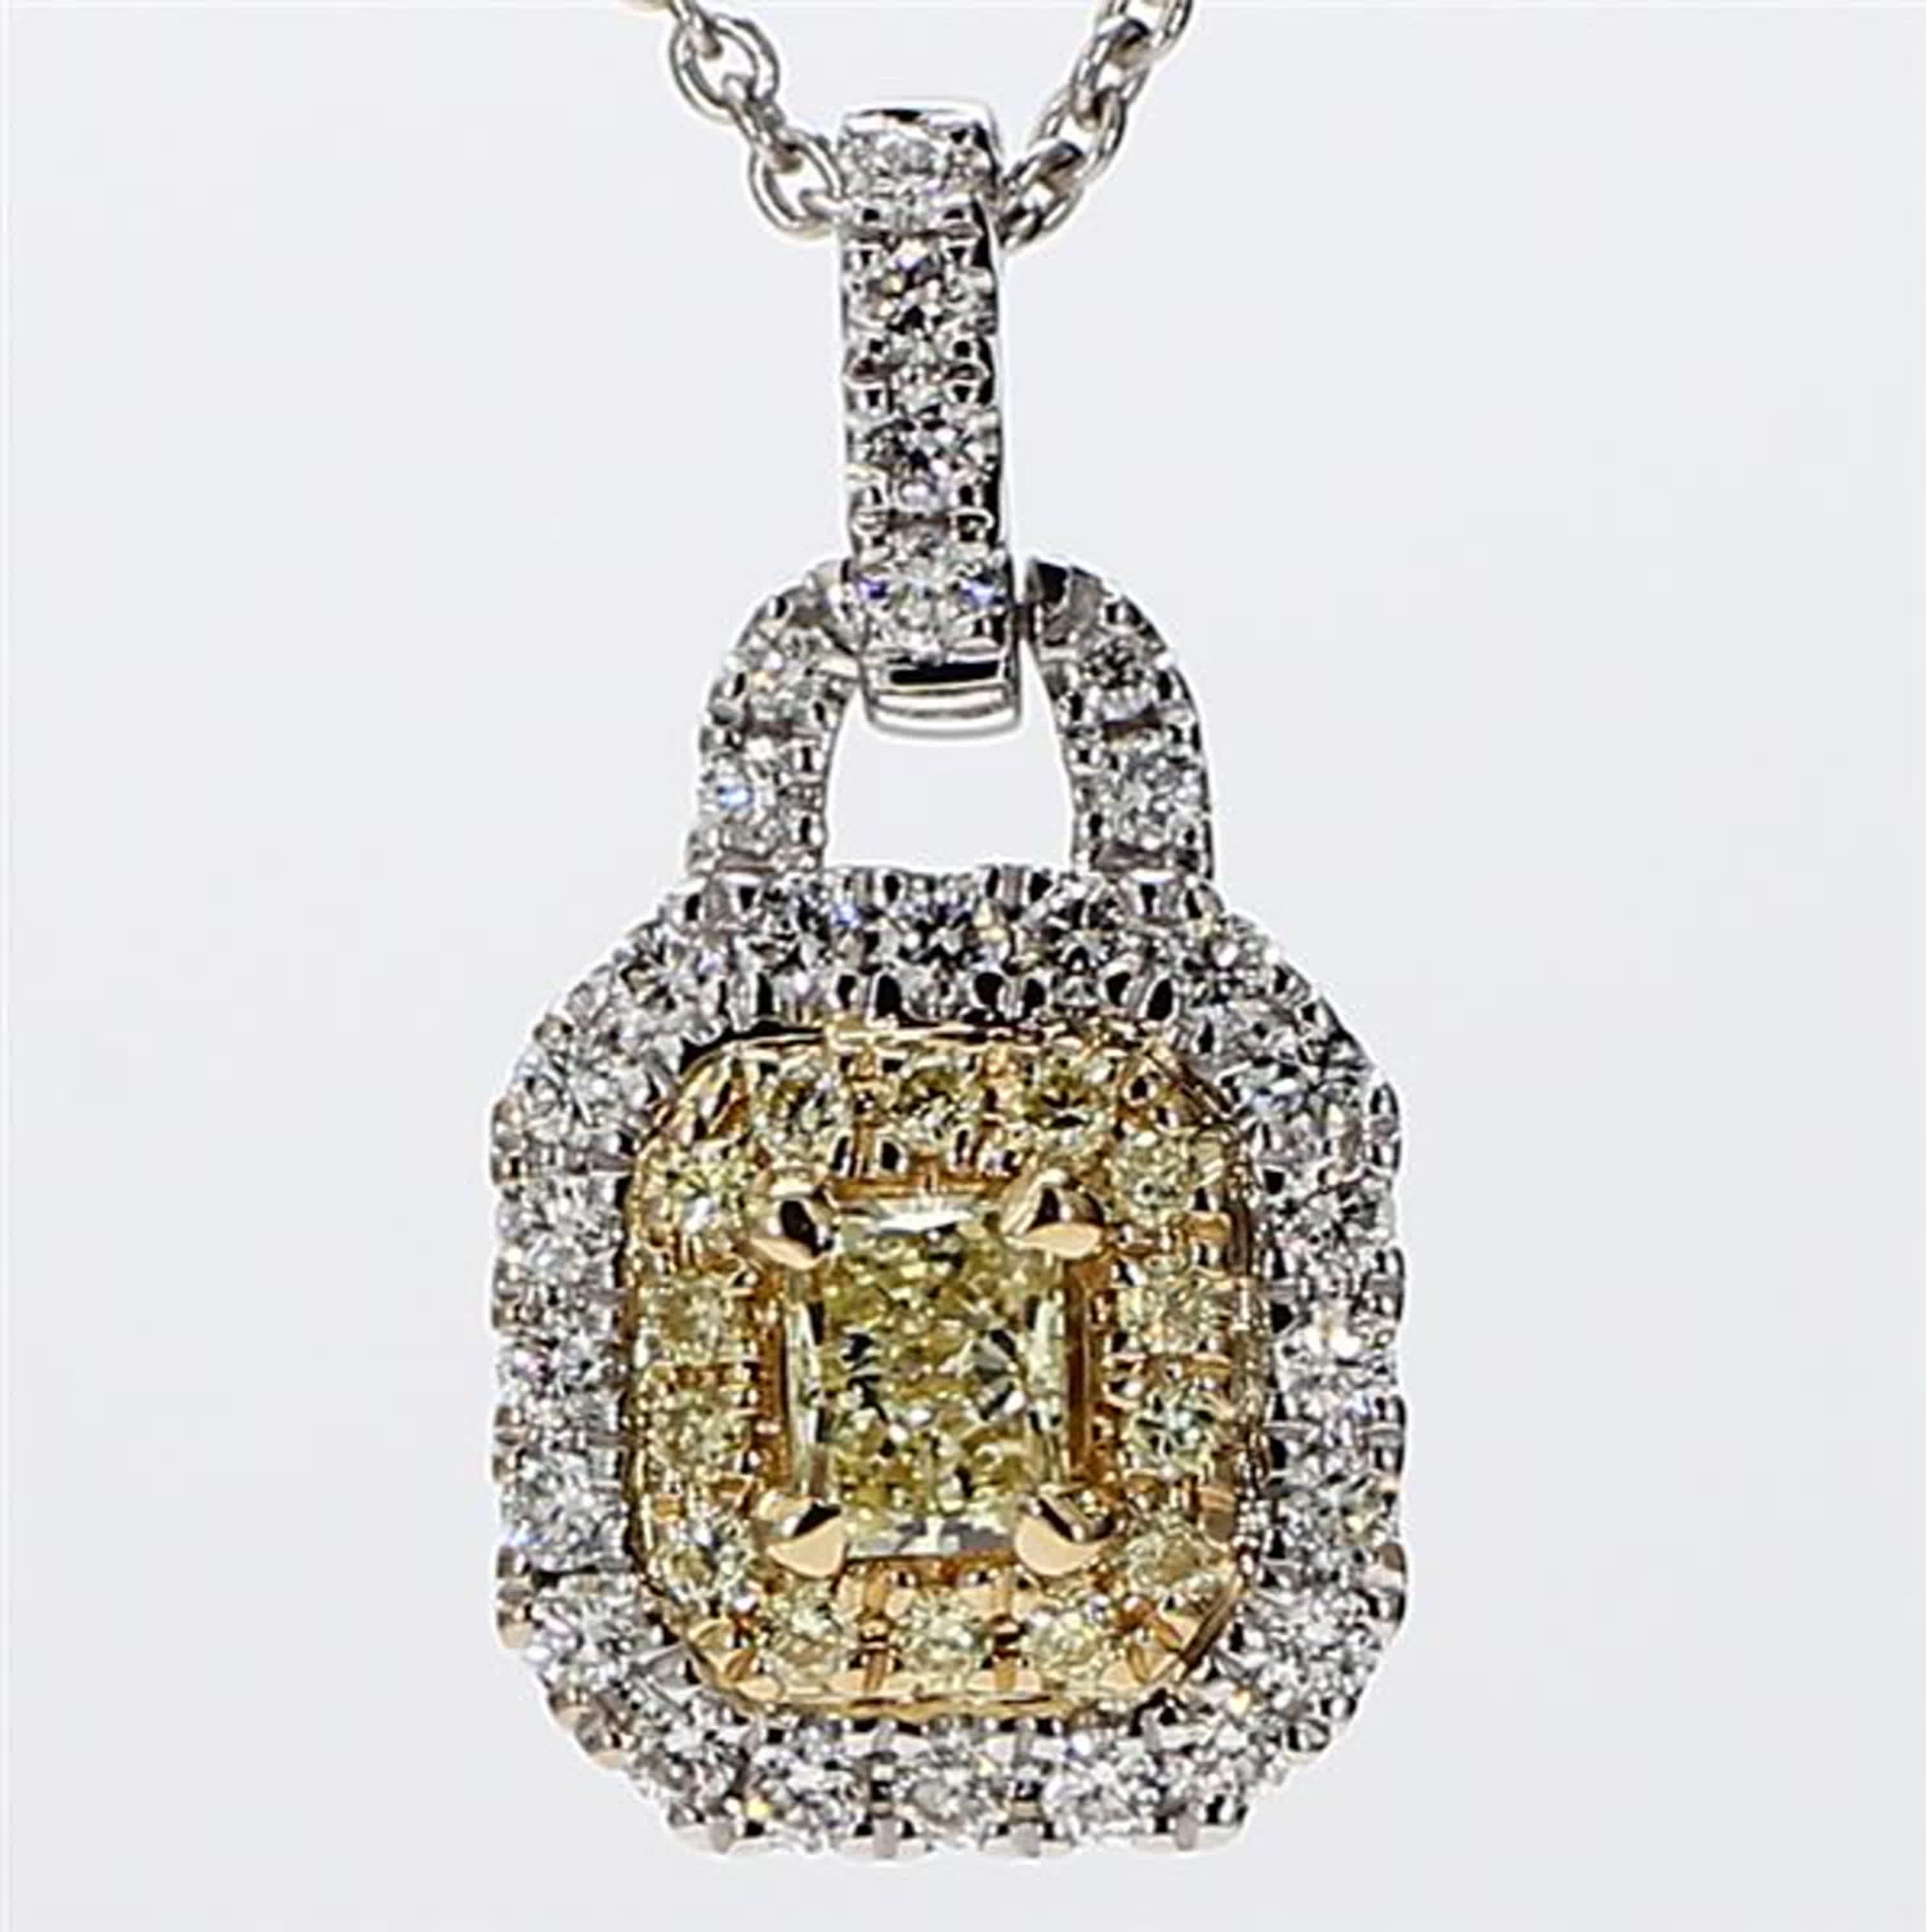 RareGemWorld's classic diamond pendant. Mounted in a beautiful 18K Yellow and White Gold setting with natural radiant cut yellow diamonds. The yellow diamonds are surrounded by small round natural white diamond melee. This pendant is guaranteed to